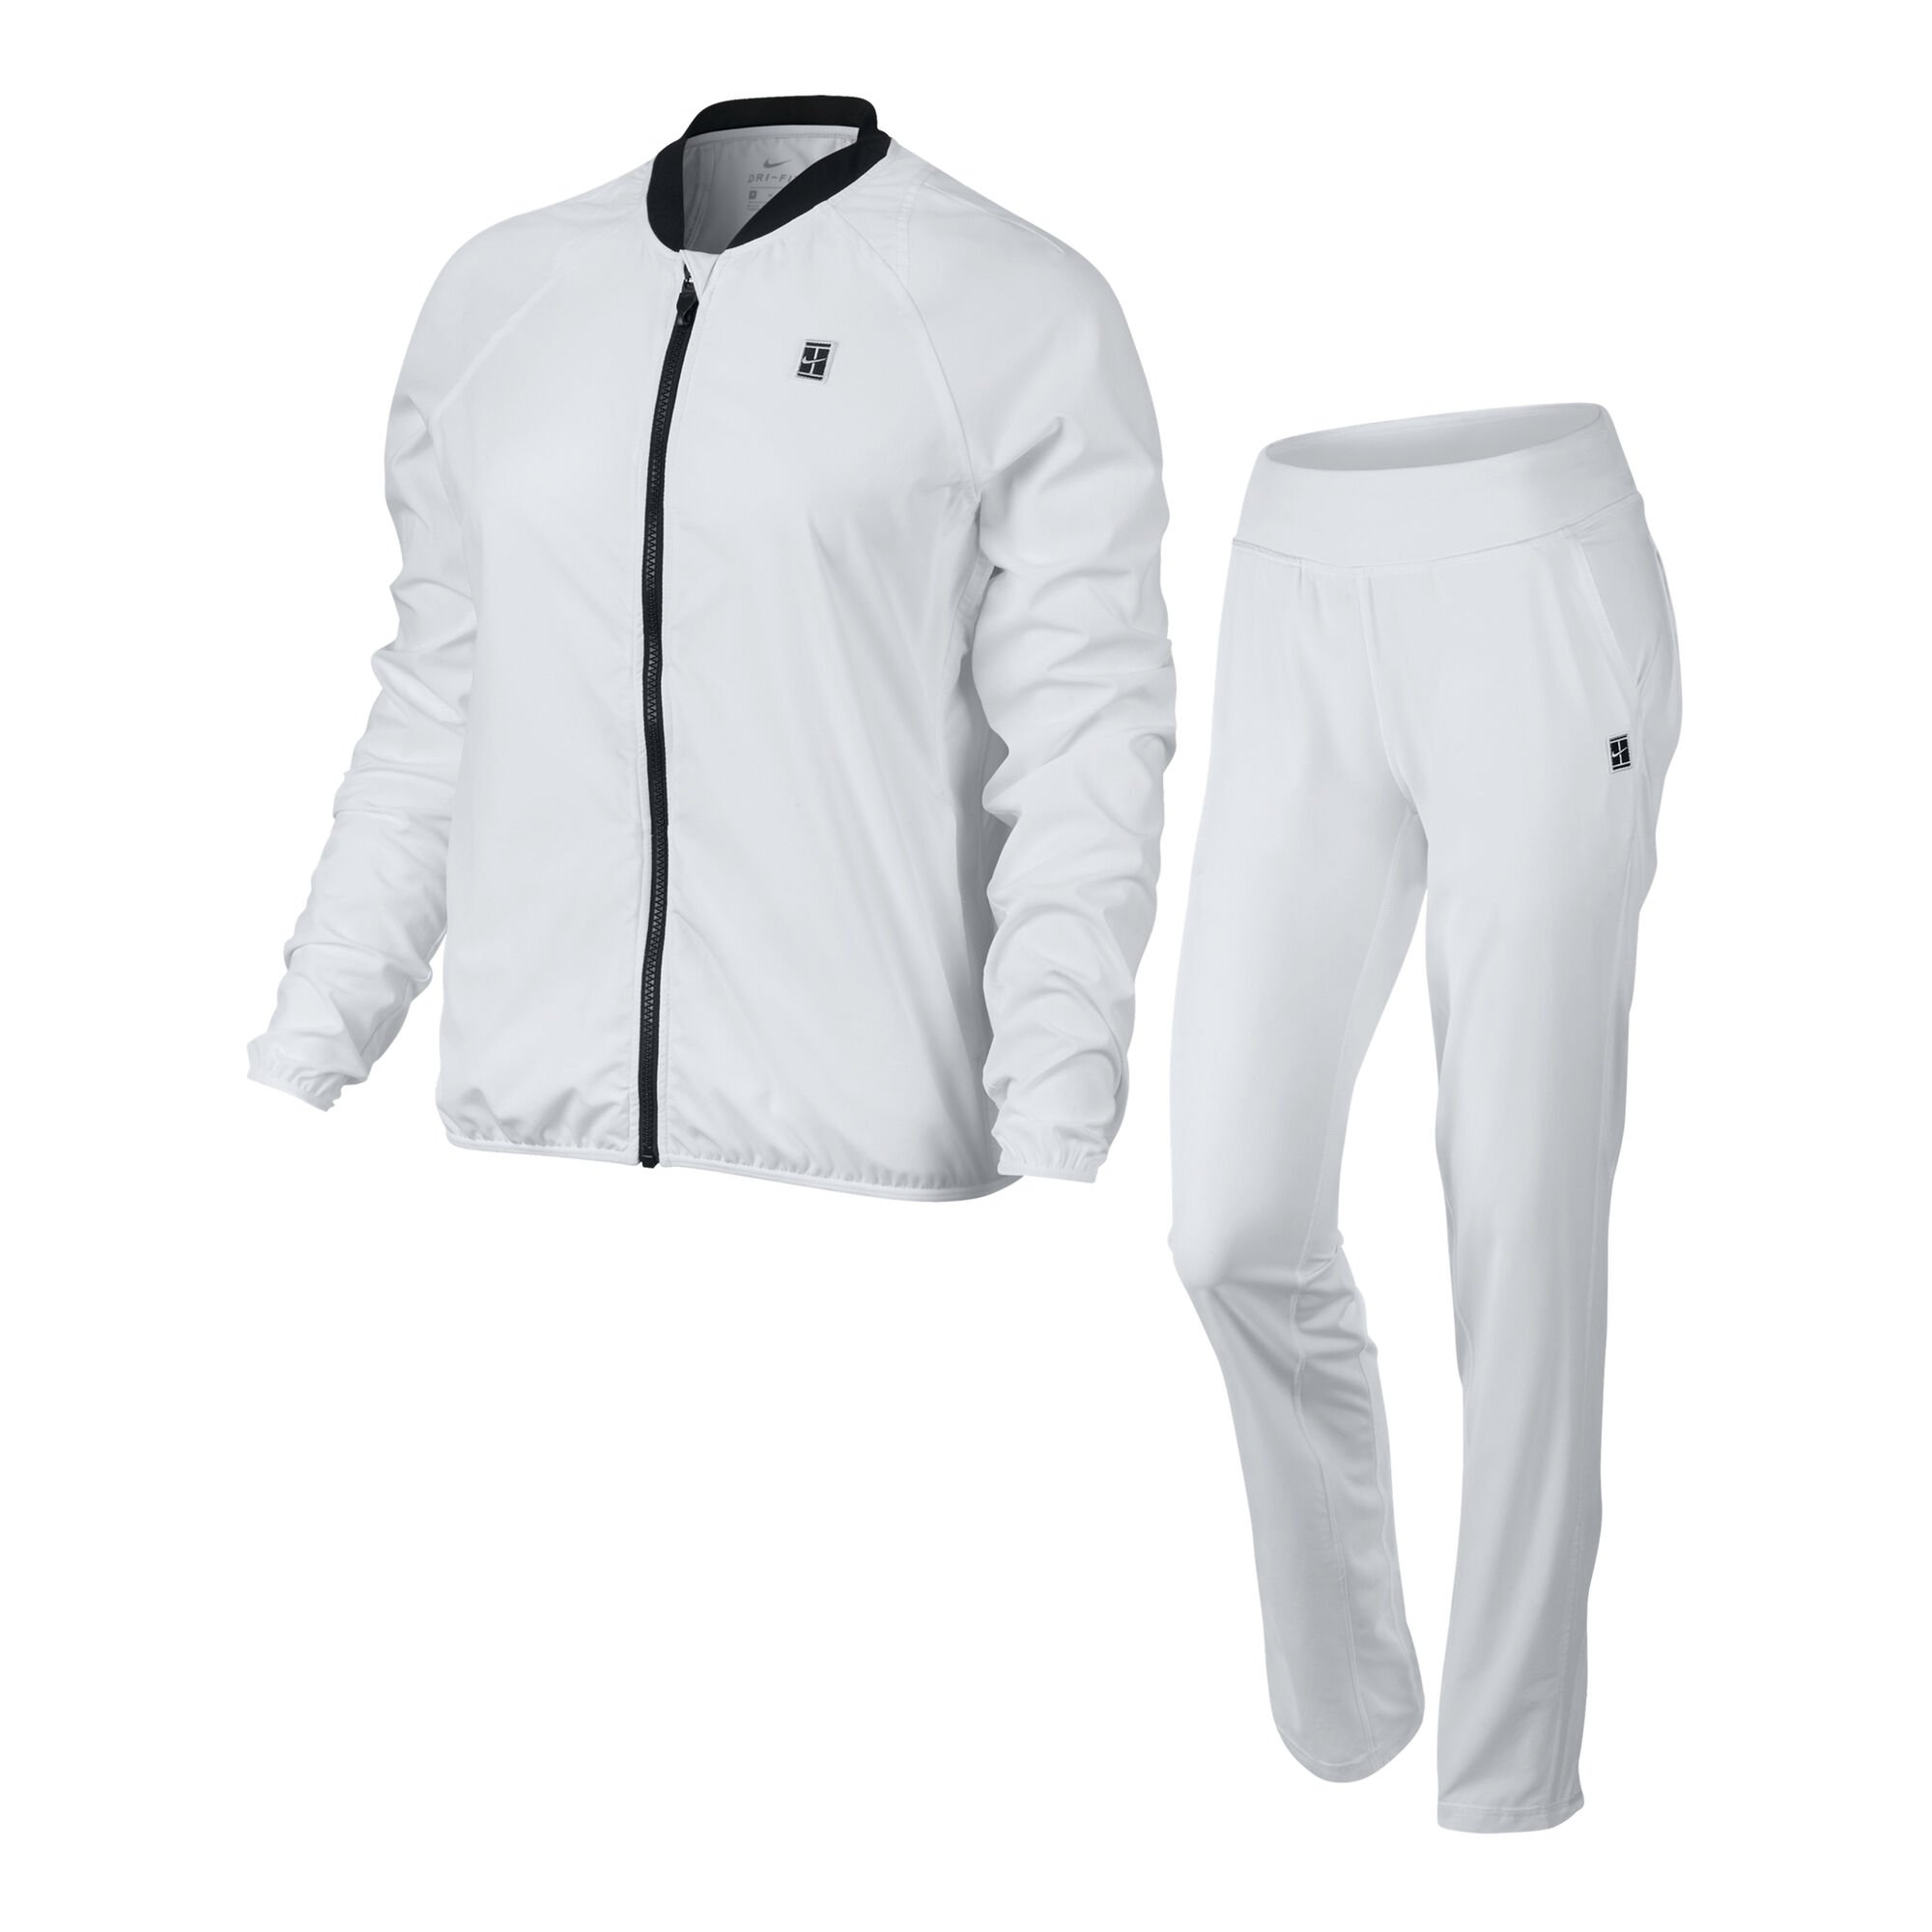 Sprout Bangladesh Mona Lisa buy Nike Court Woven Warm Up Tracksuit Women - White, Black online | Tennis -Point